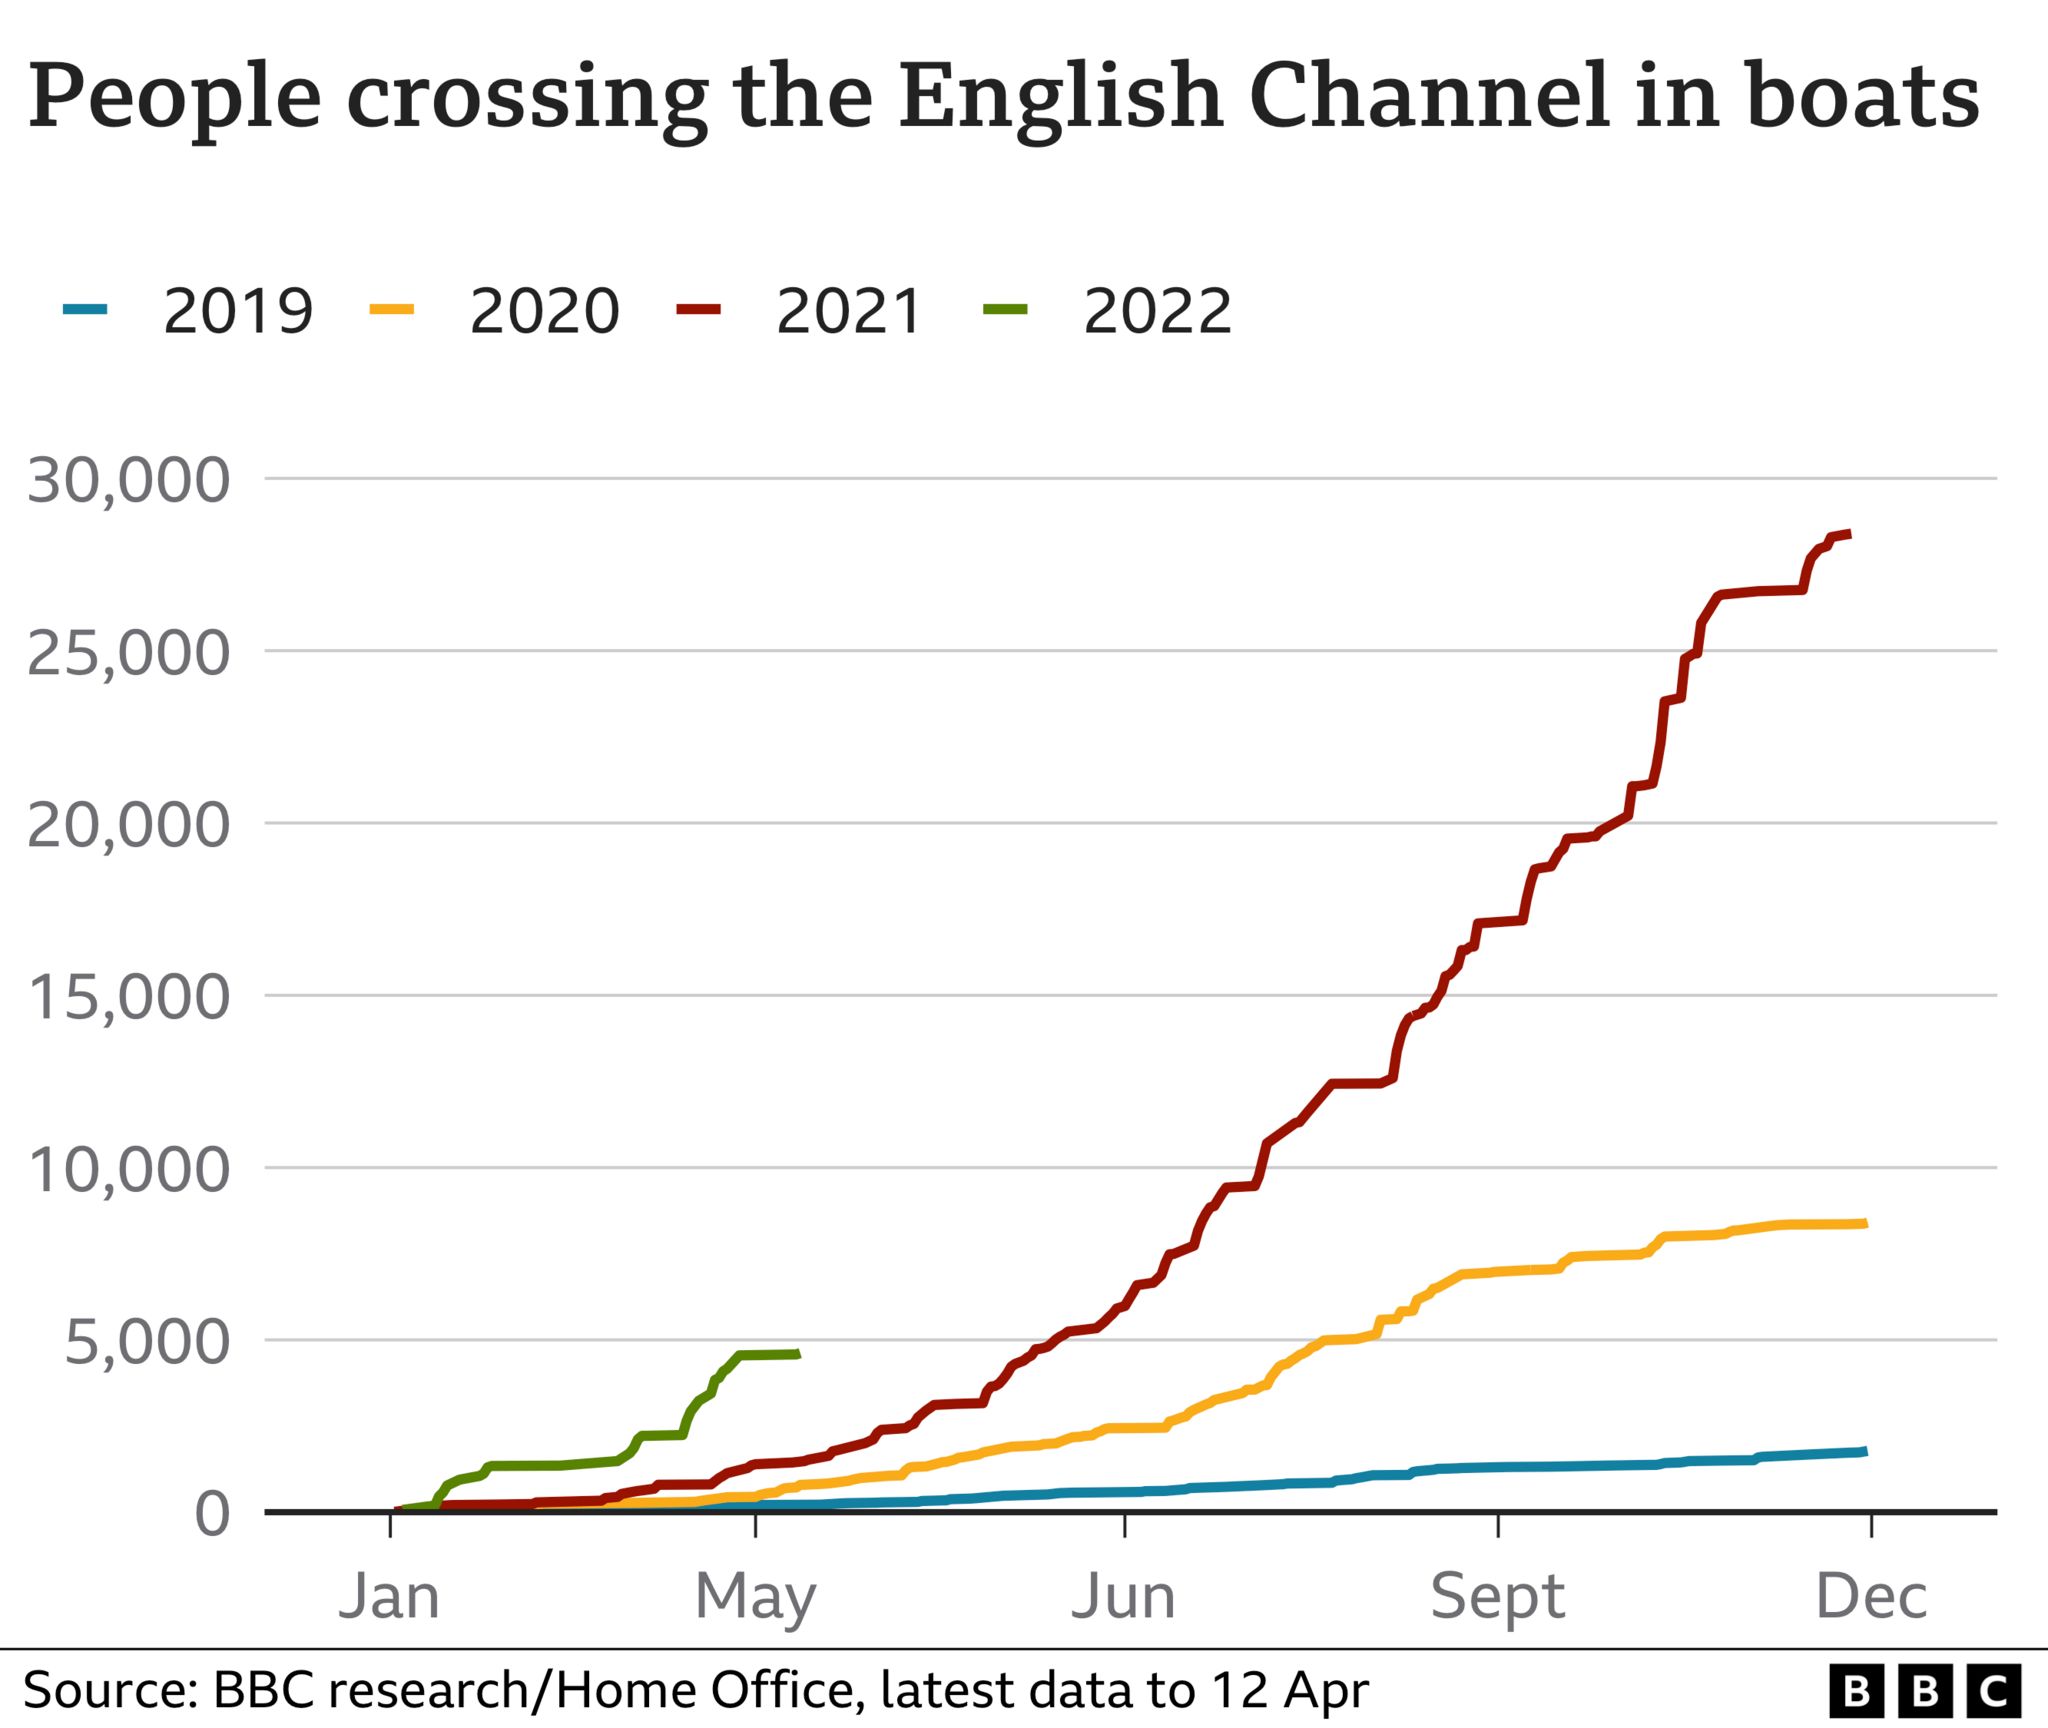 Line graph showing numbers of people crossing the English Channel between 2019 and 2022